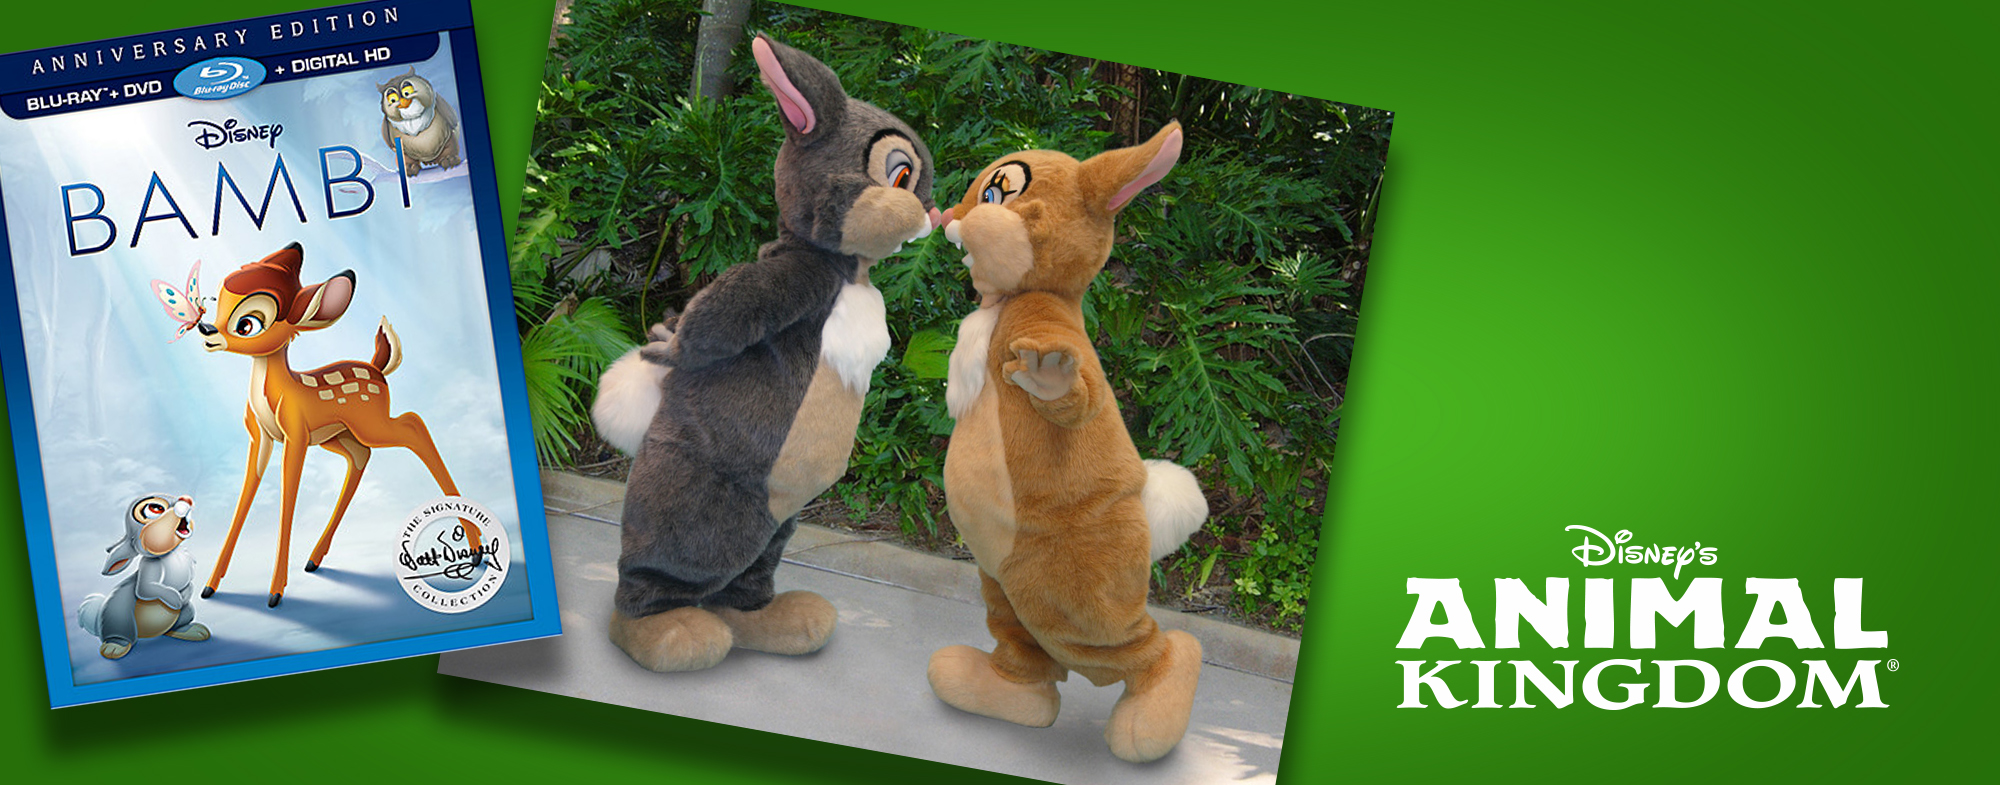 75th Anniversary of ‘Bambi’ Brings a Special Meet & Greet to the Parks and PhotoPass Exclusives!